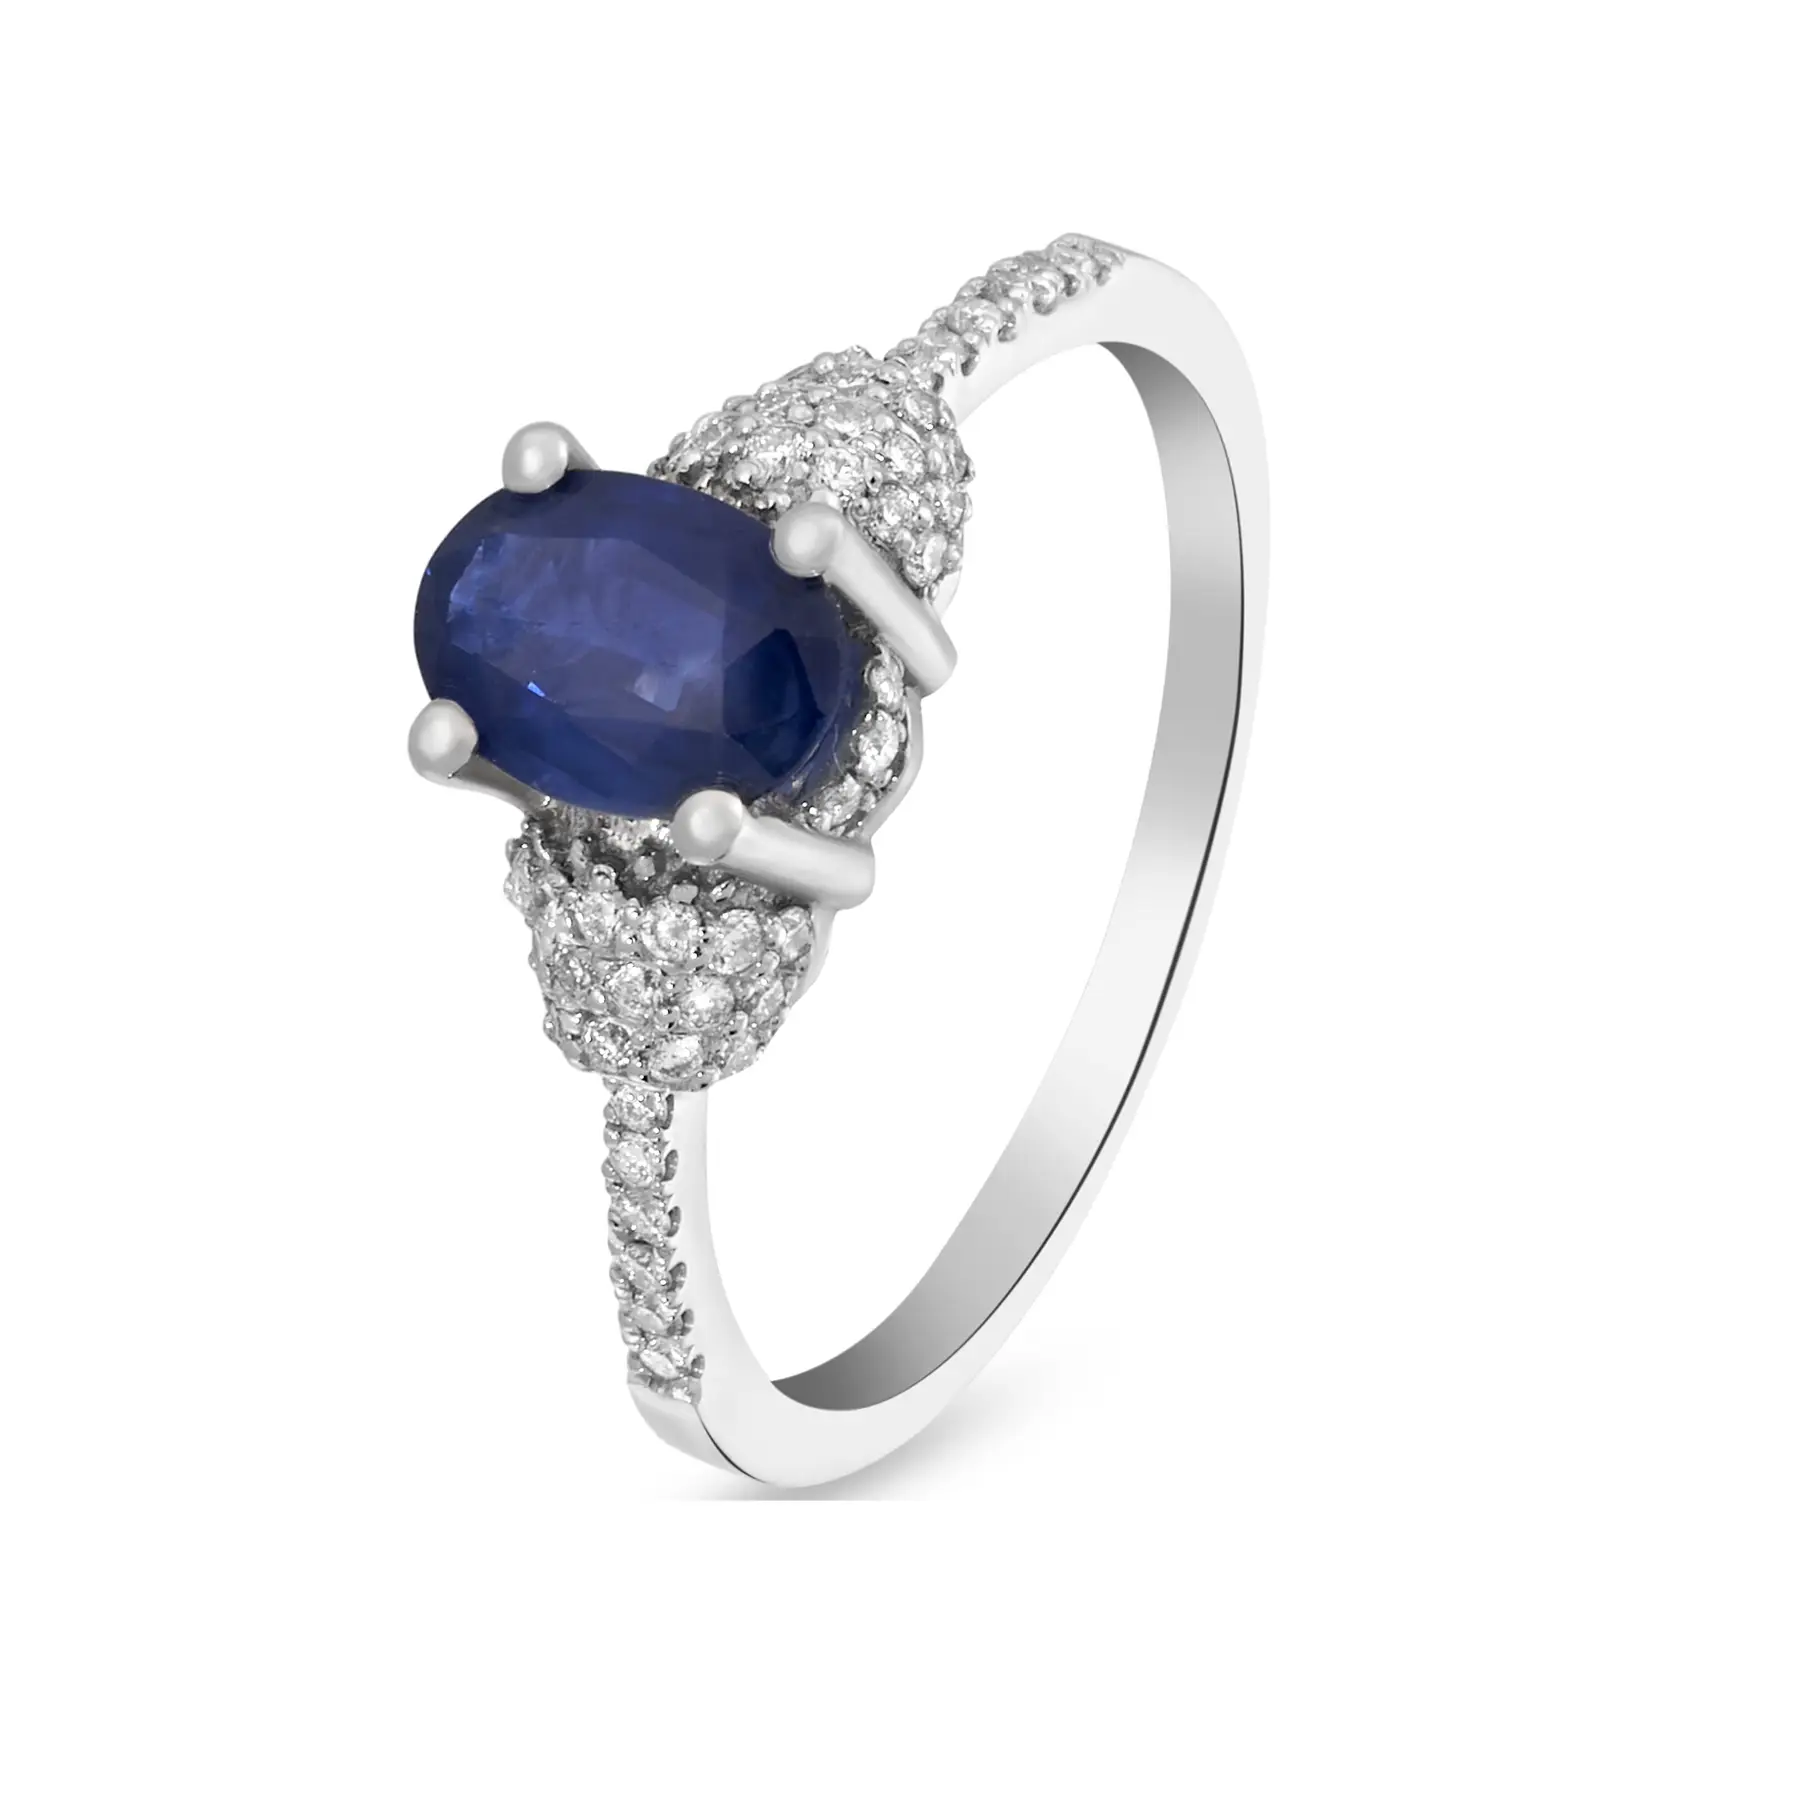 18k white gold 0.90 ct. blue sapphire and 0.23 ct.tw . diamonds ring 36670484516715